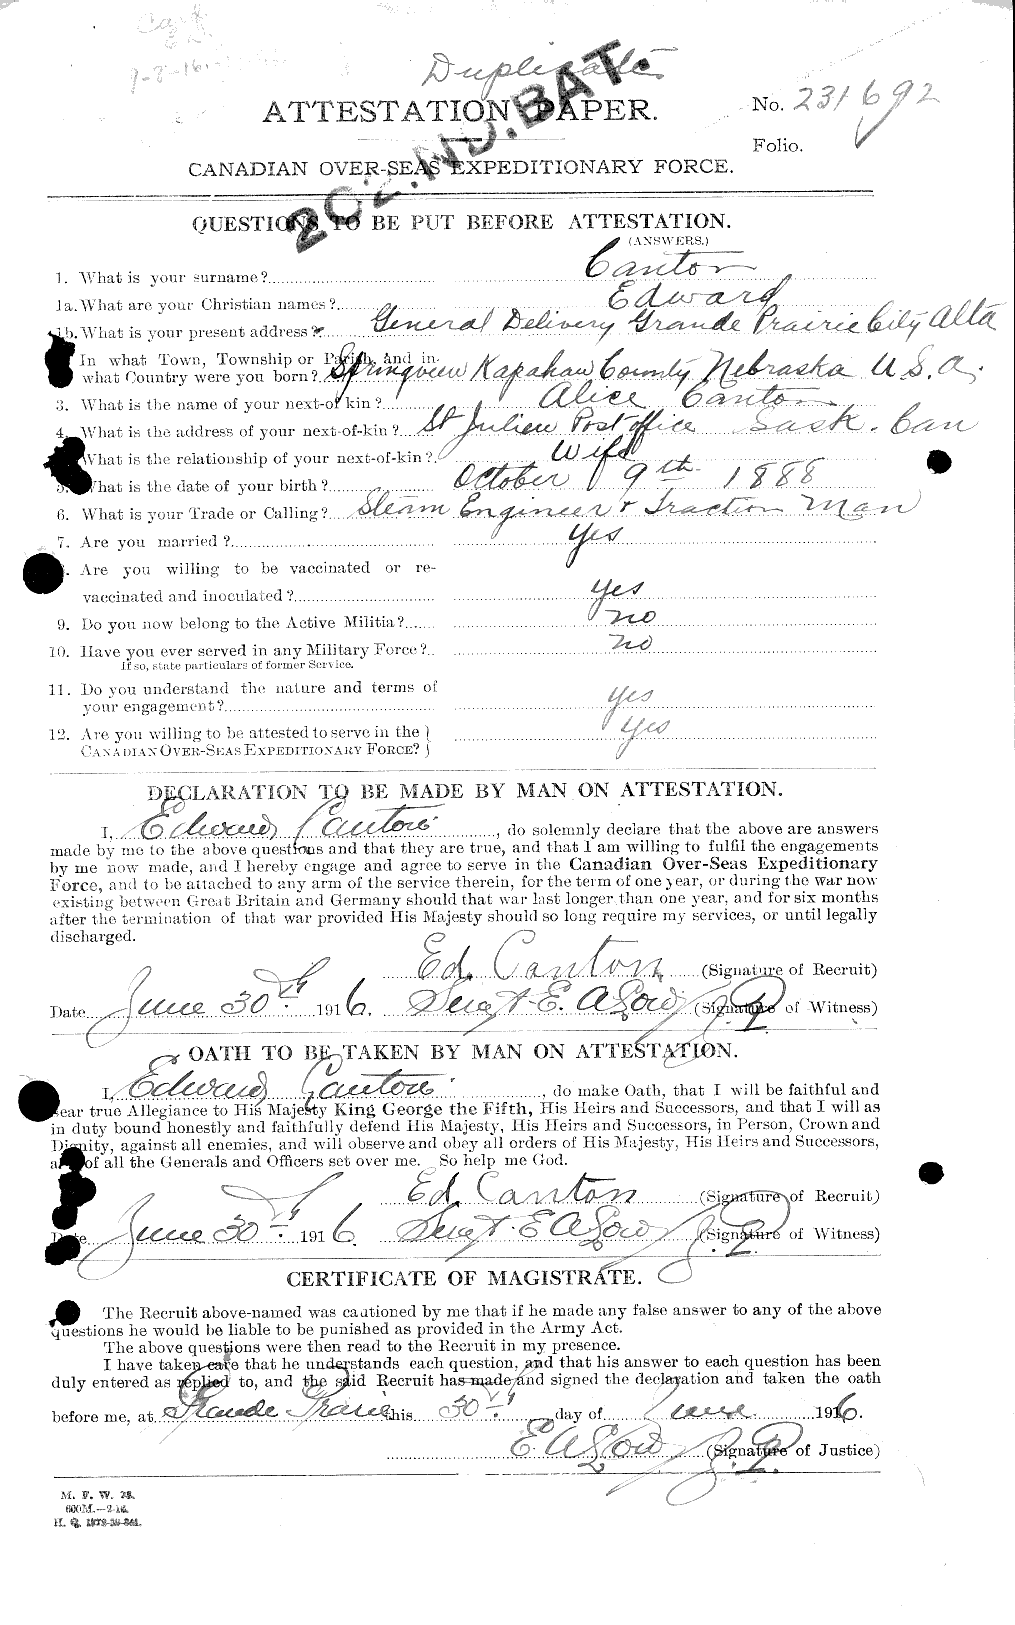 Personnel Records of the First World War - CEF 009121a